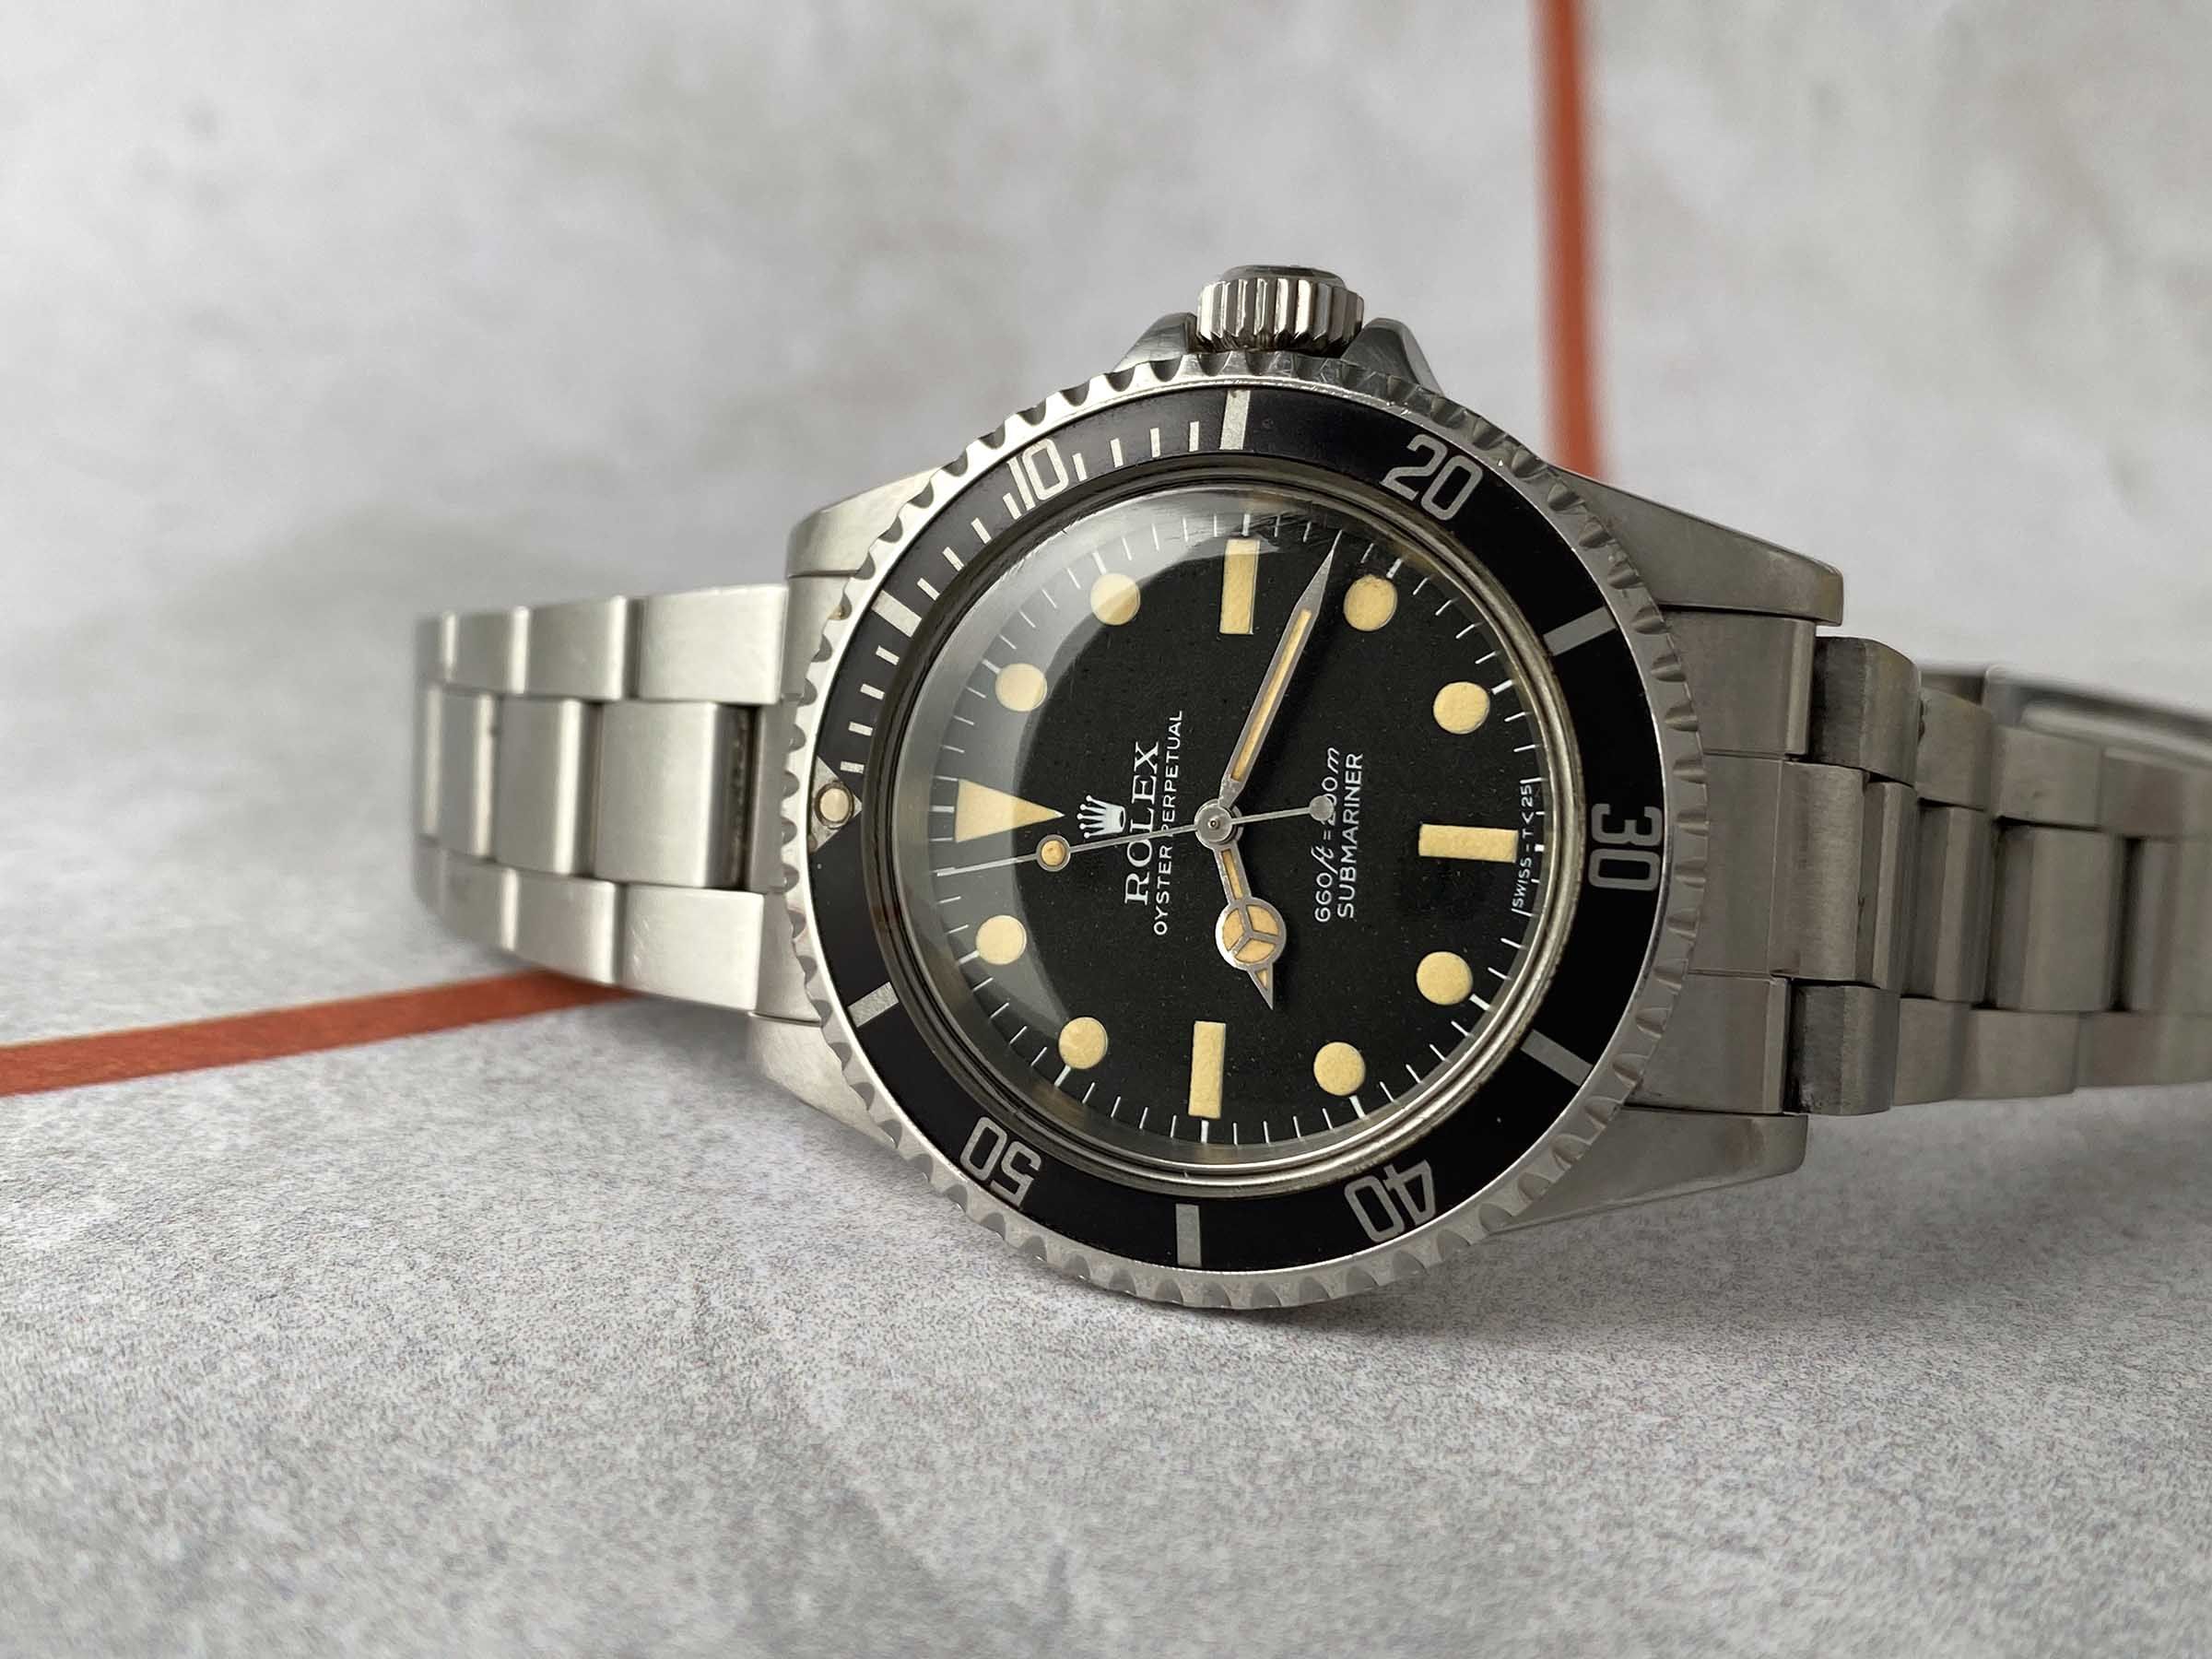 ROLEX OYSTER PERPETUAL SUBMARINER 1978 DIAL PRE COMEX Ref. 5513